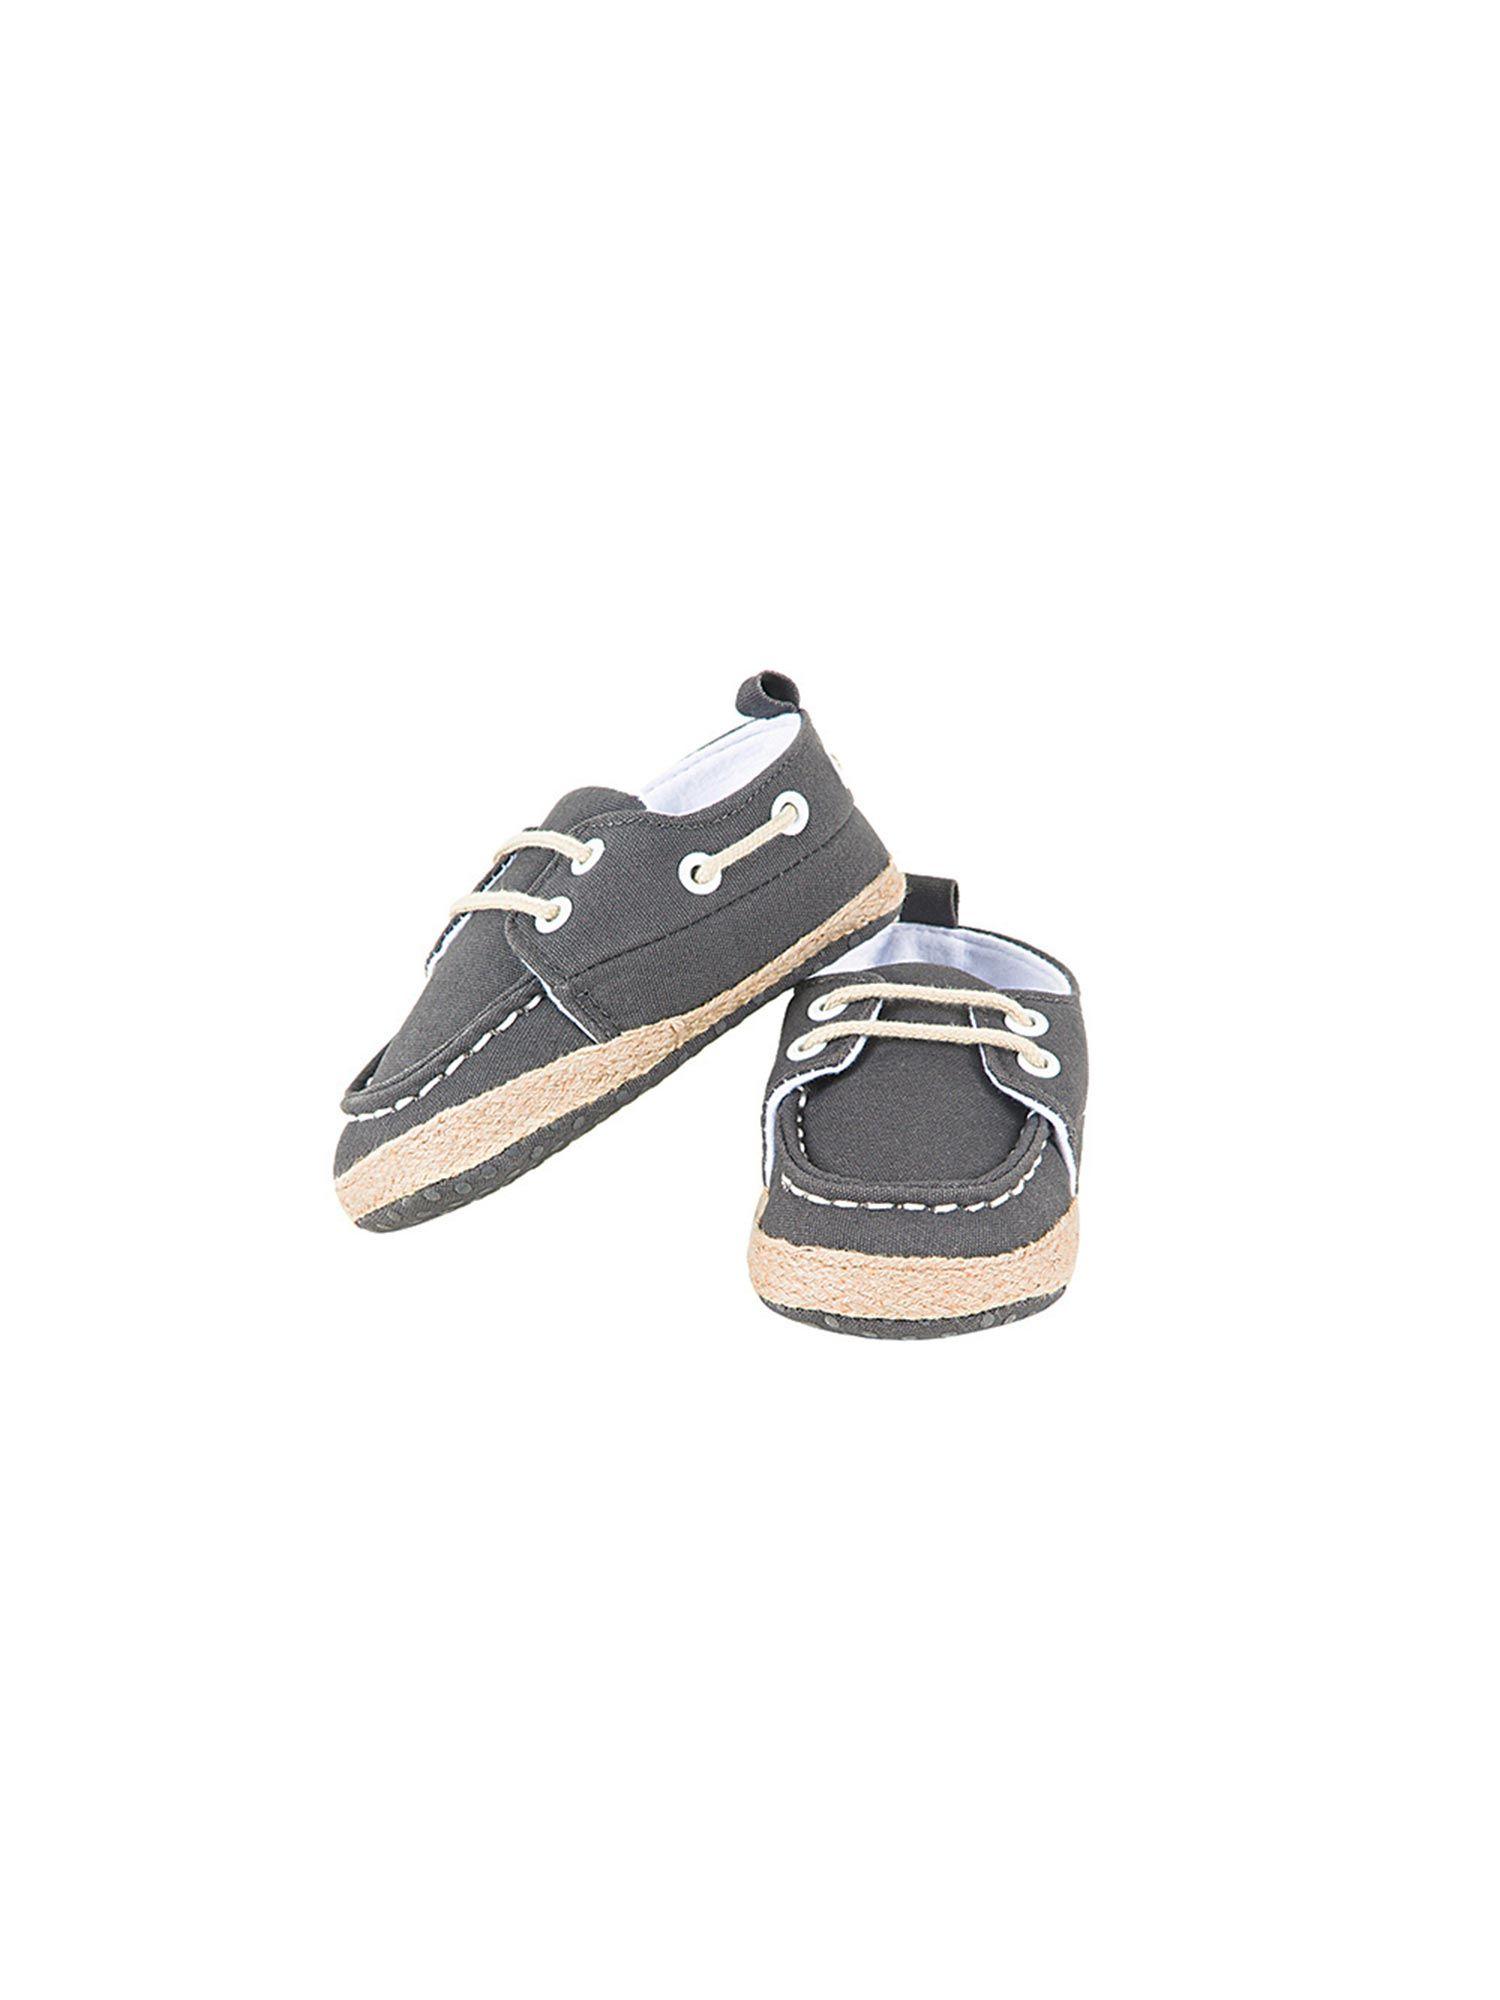 formal grey baby boat shoes